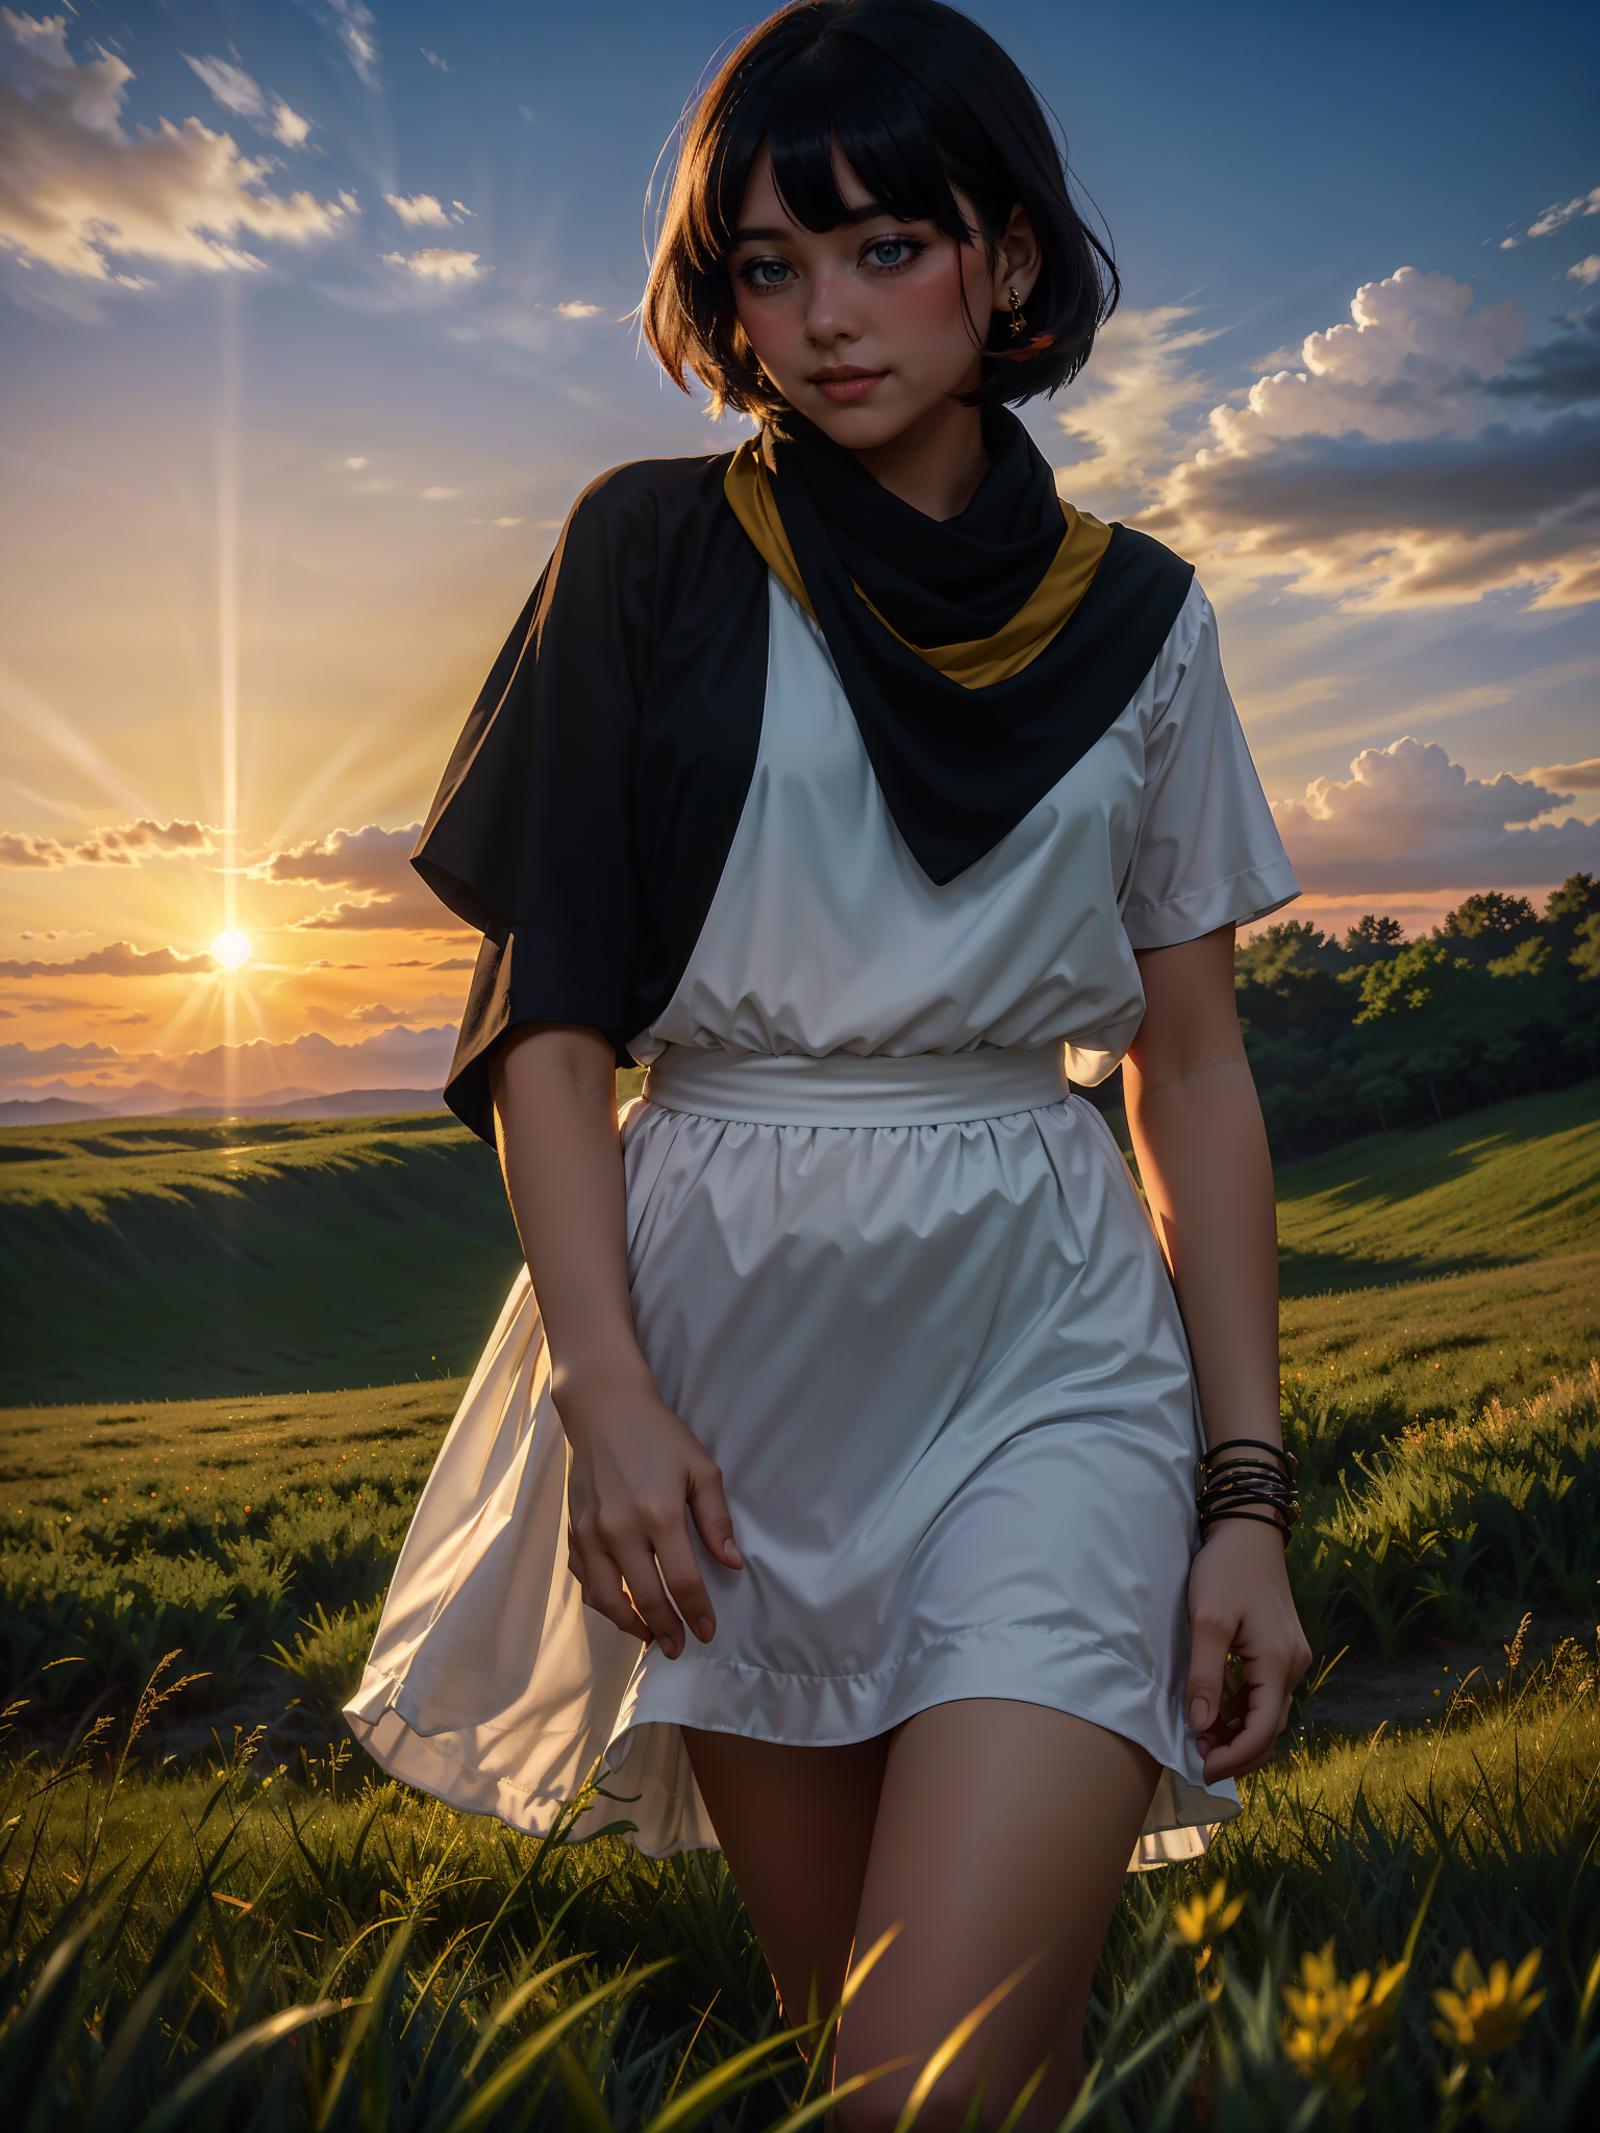 A woman in a white dress with a scarf, standing in a field during sunset.